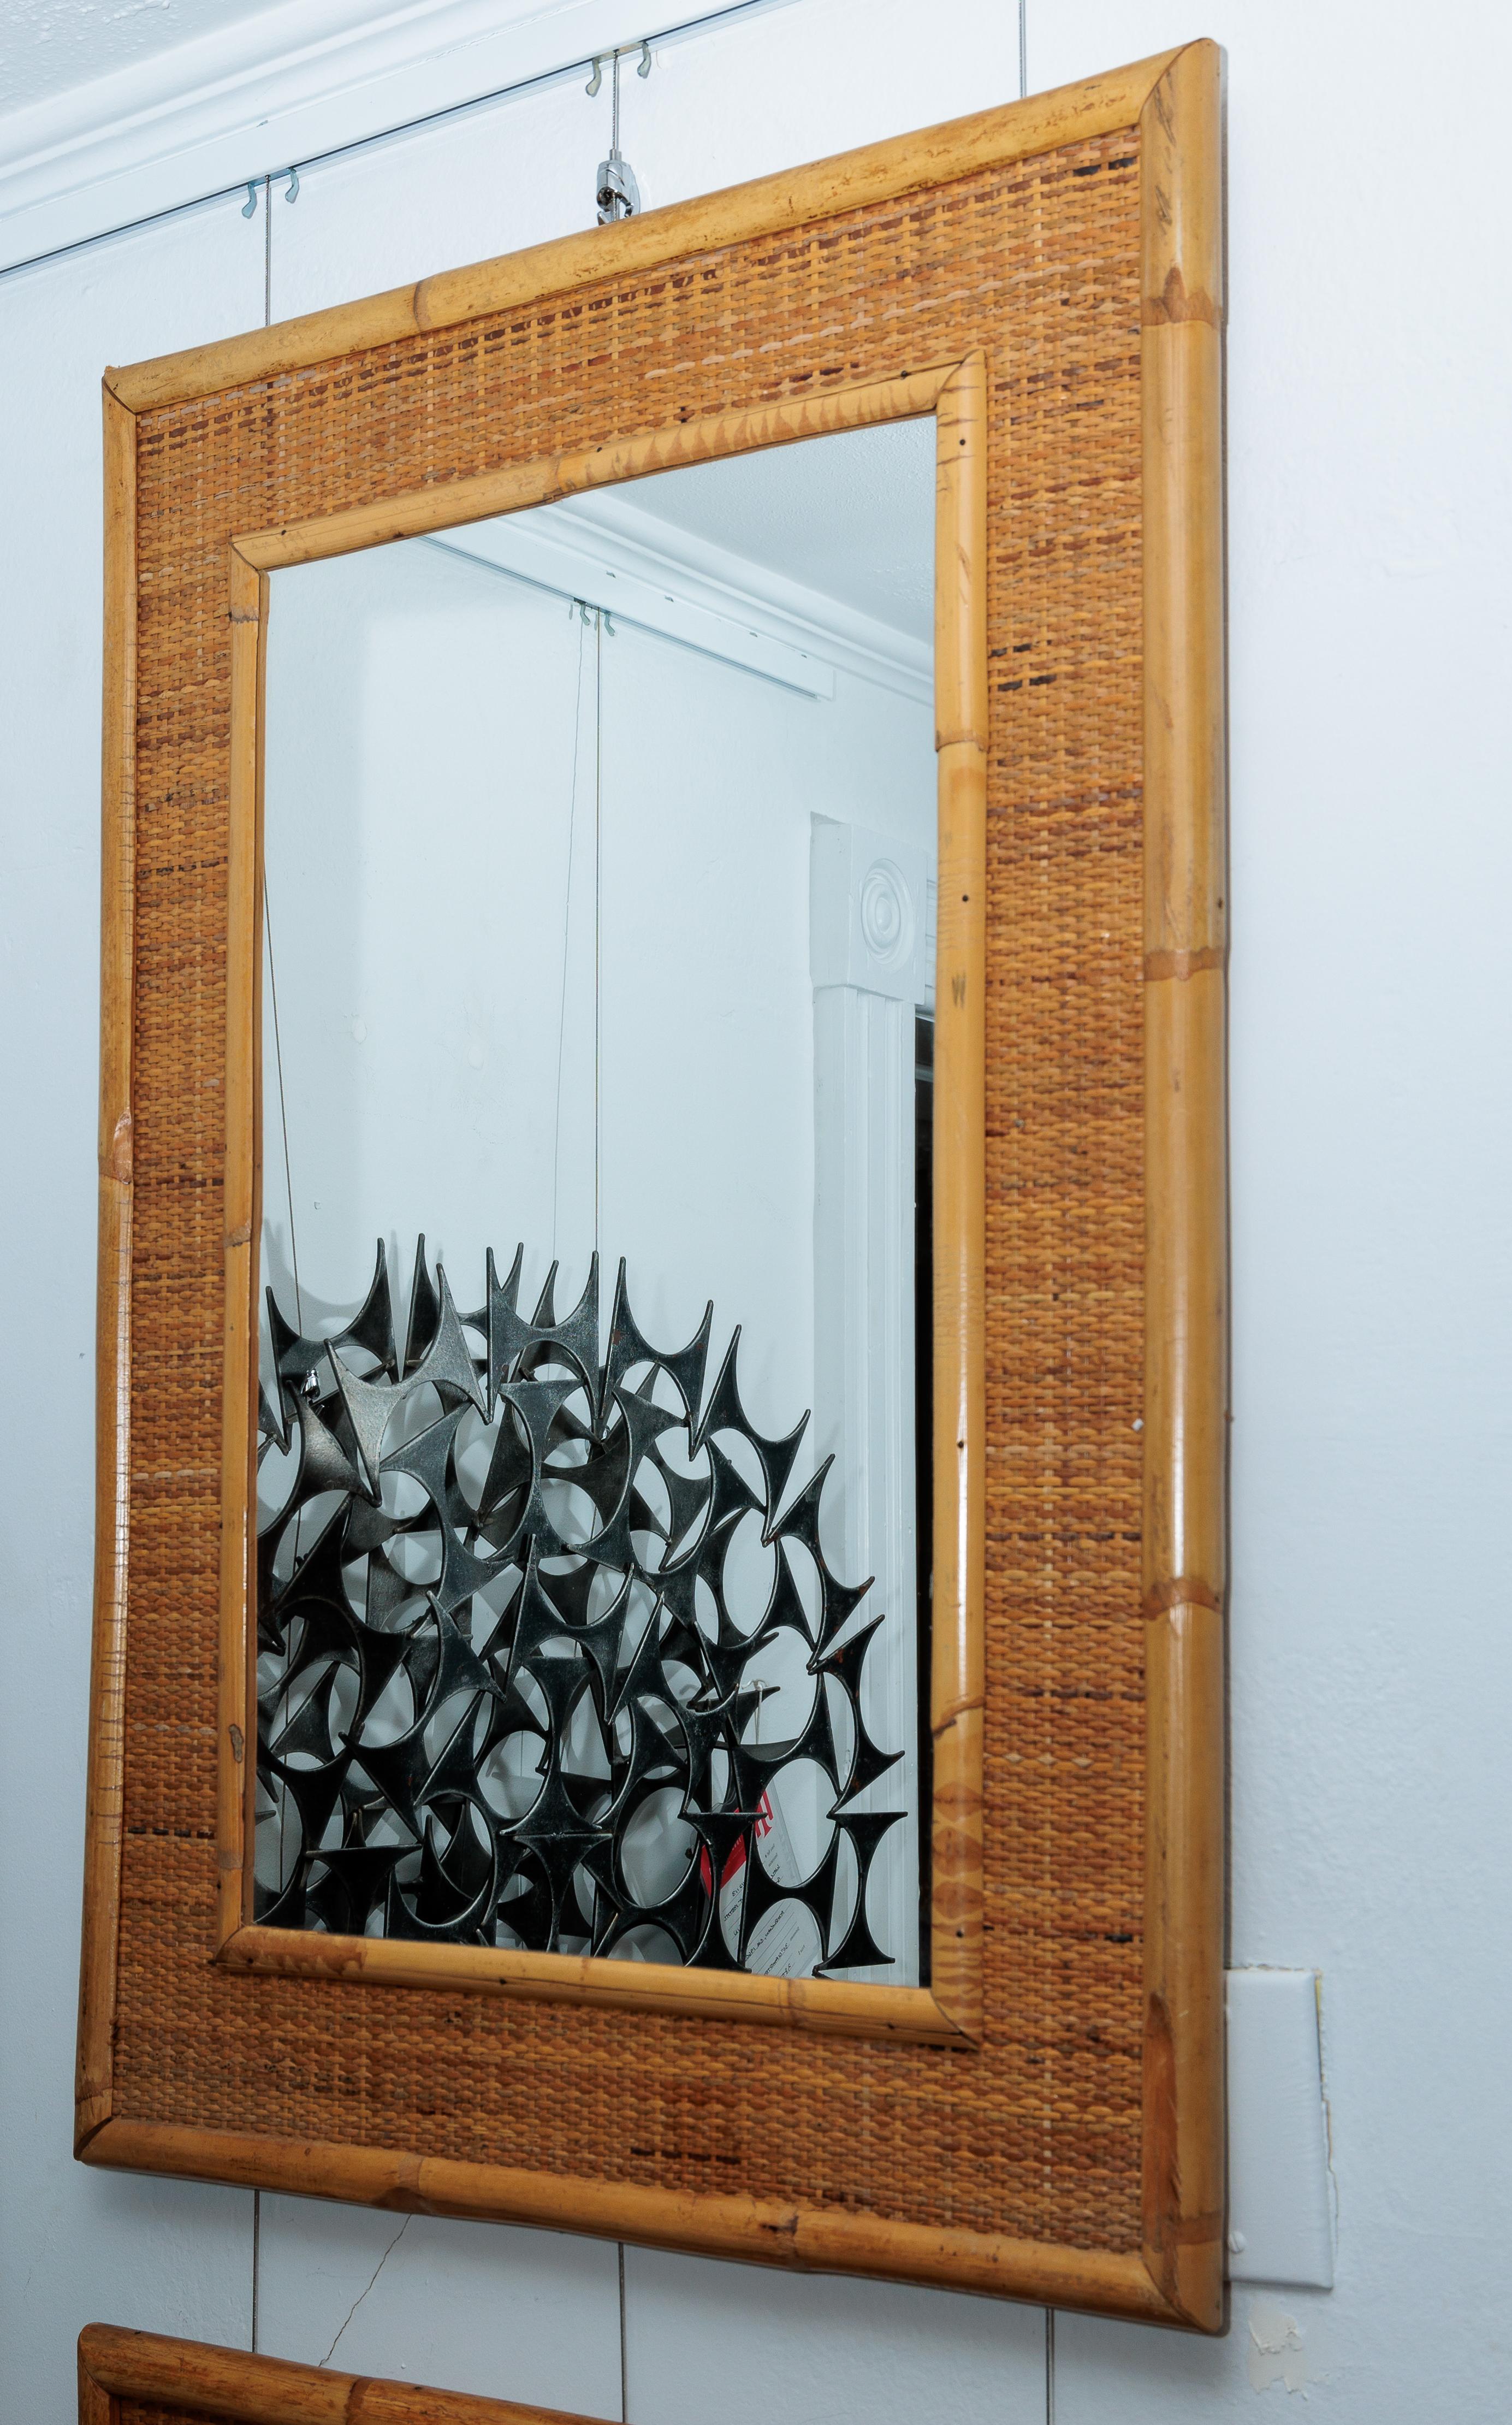 Mirror with texture and warmth will work in a bathroom, bedroom, etc.